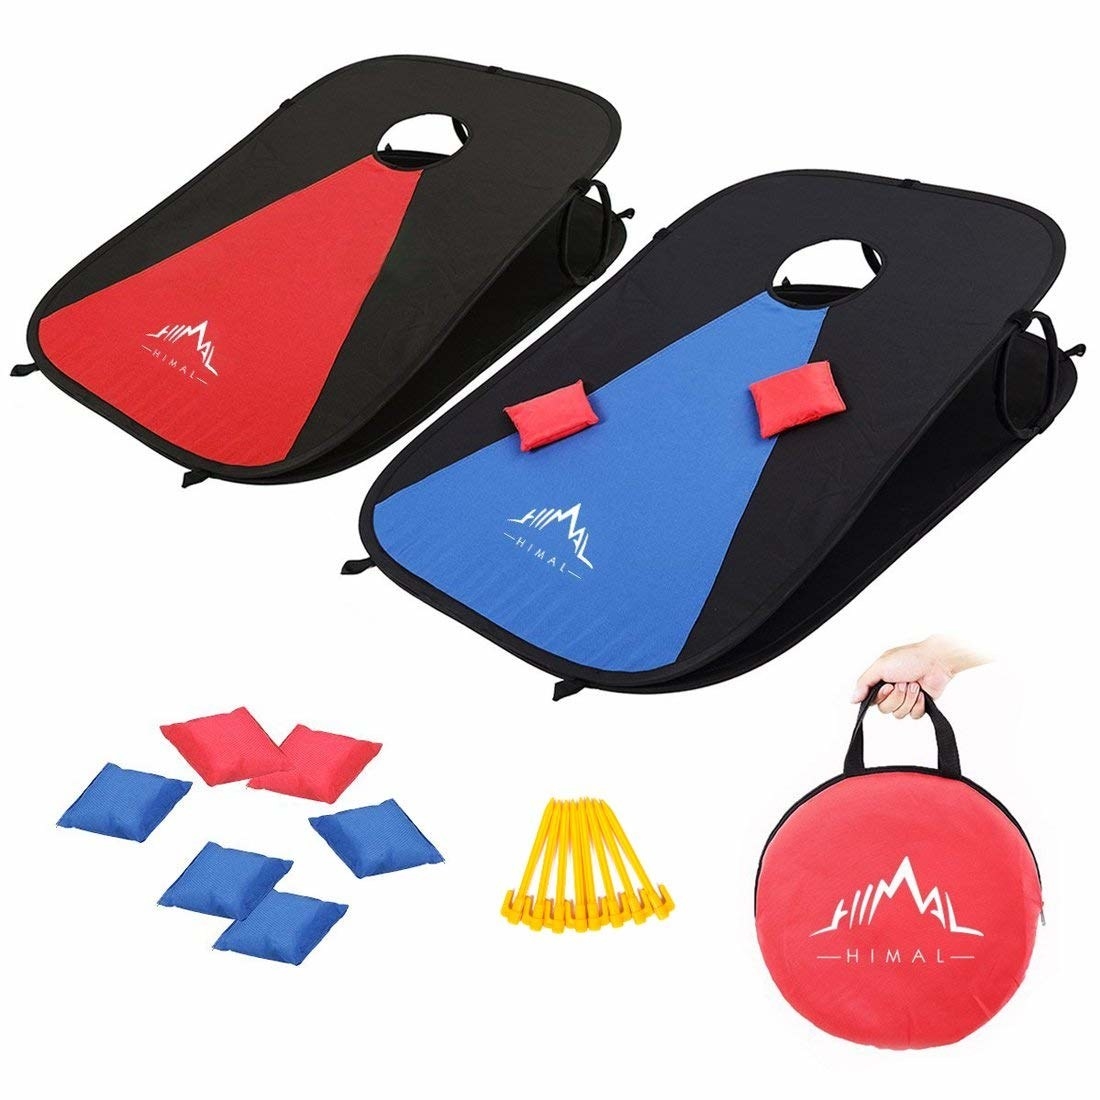 the red and blue portable cornhole set